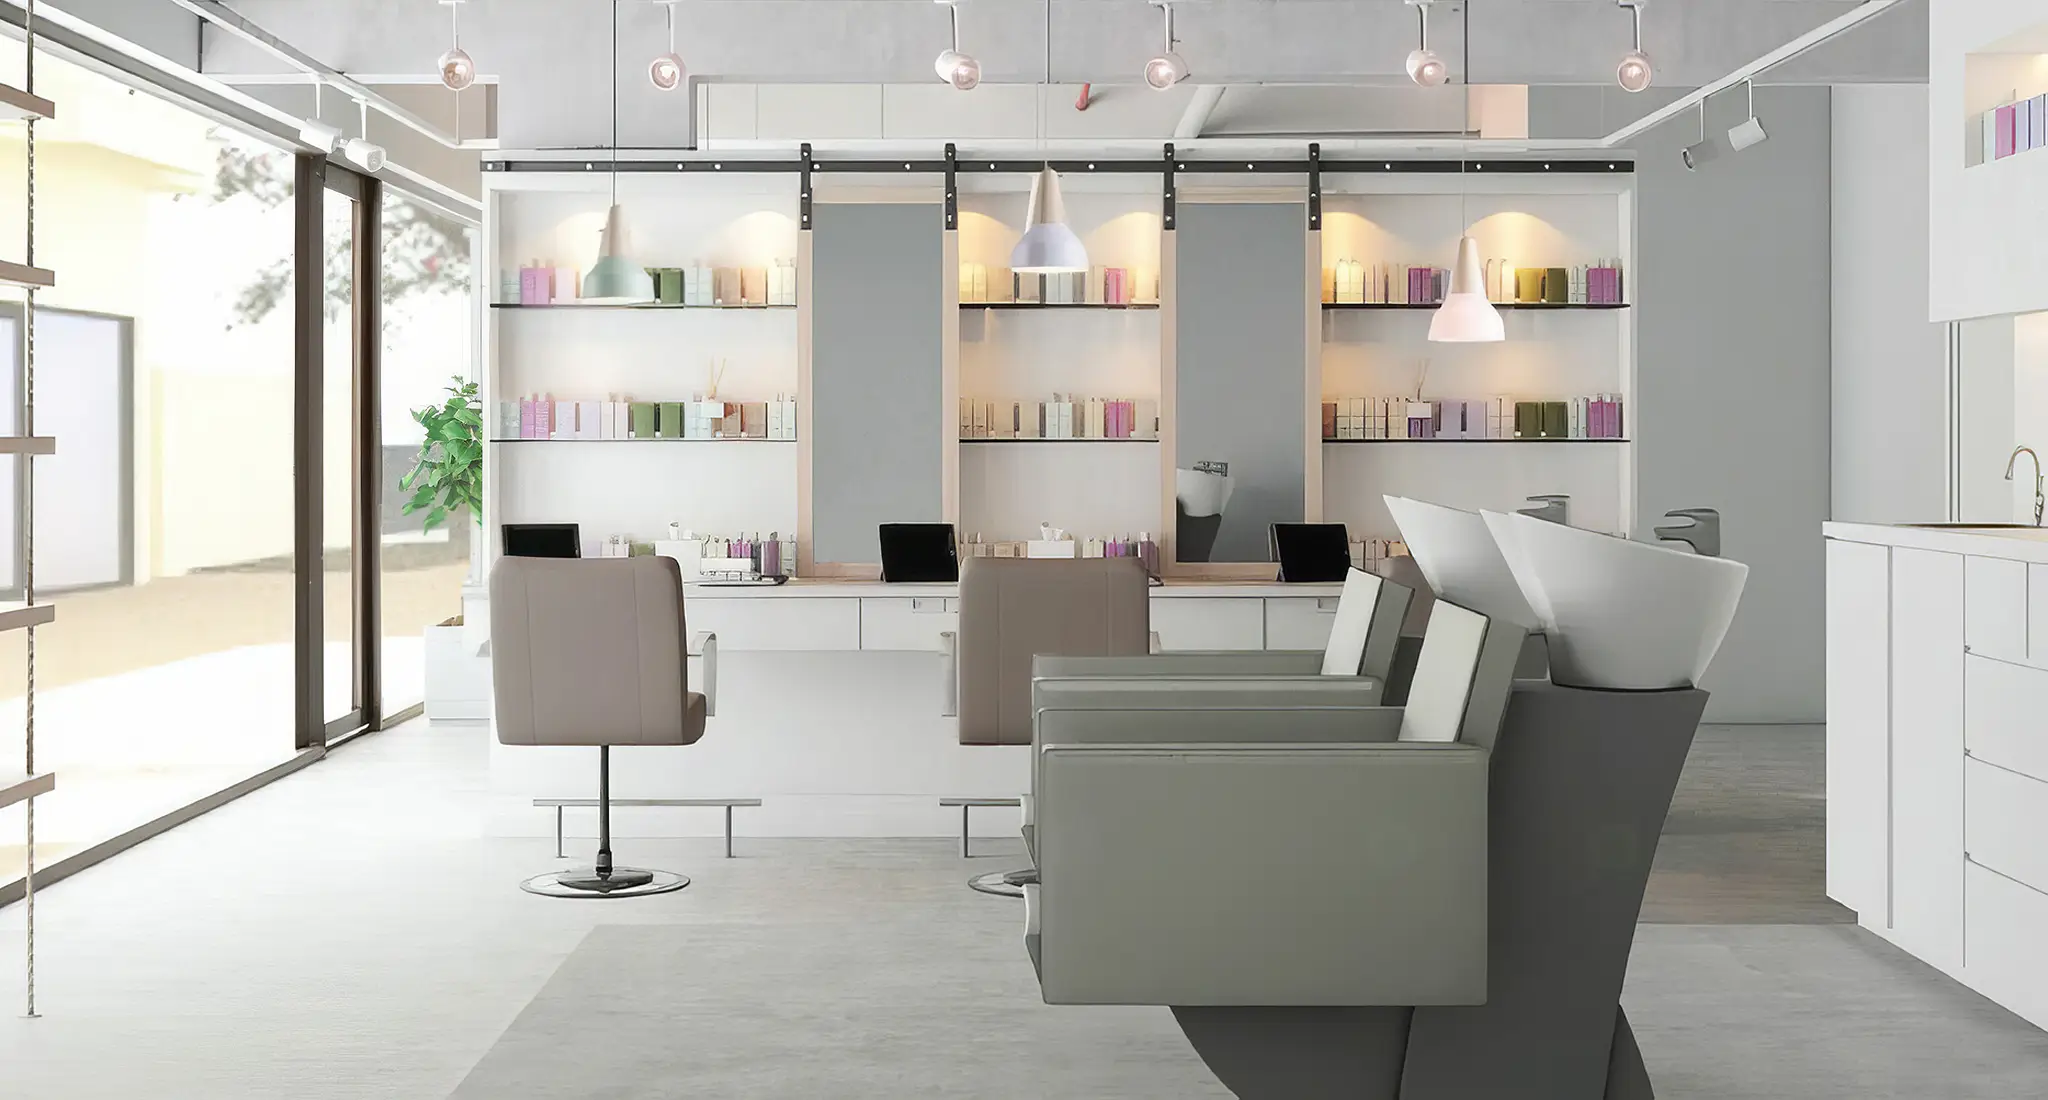 her bar blowdry salon in abu dhabi, showcasing a prominent white counter and stylish chairs.